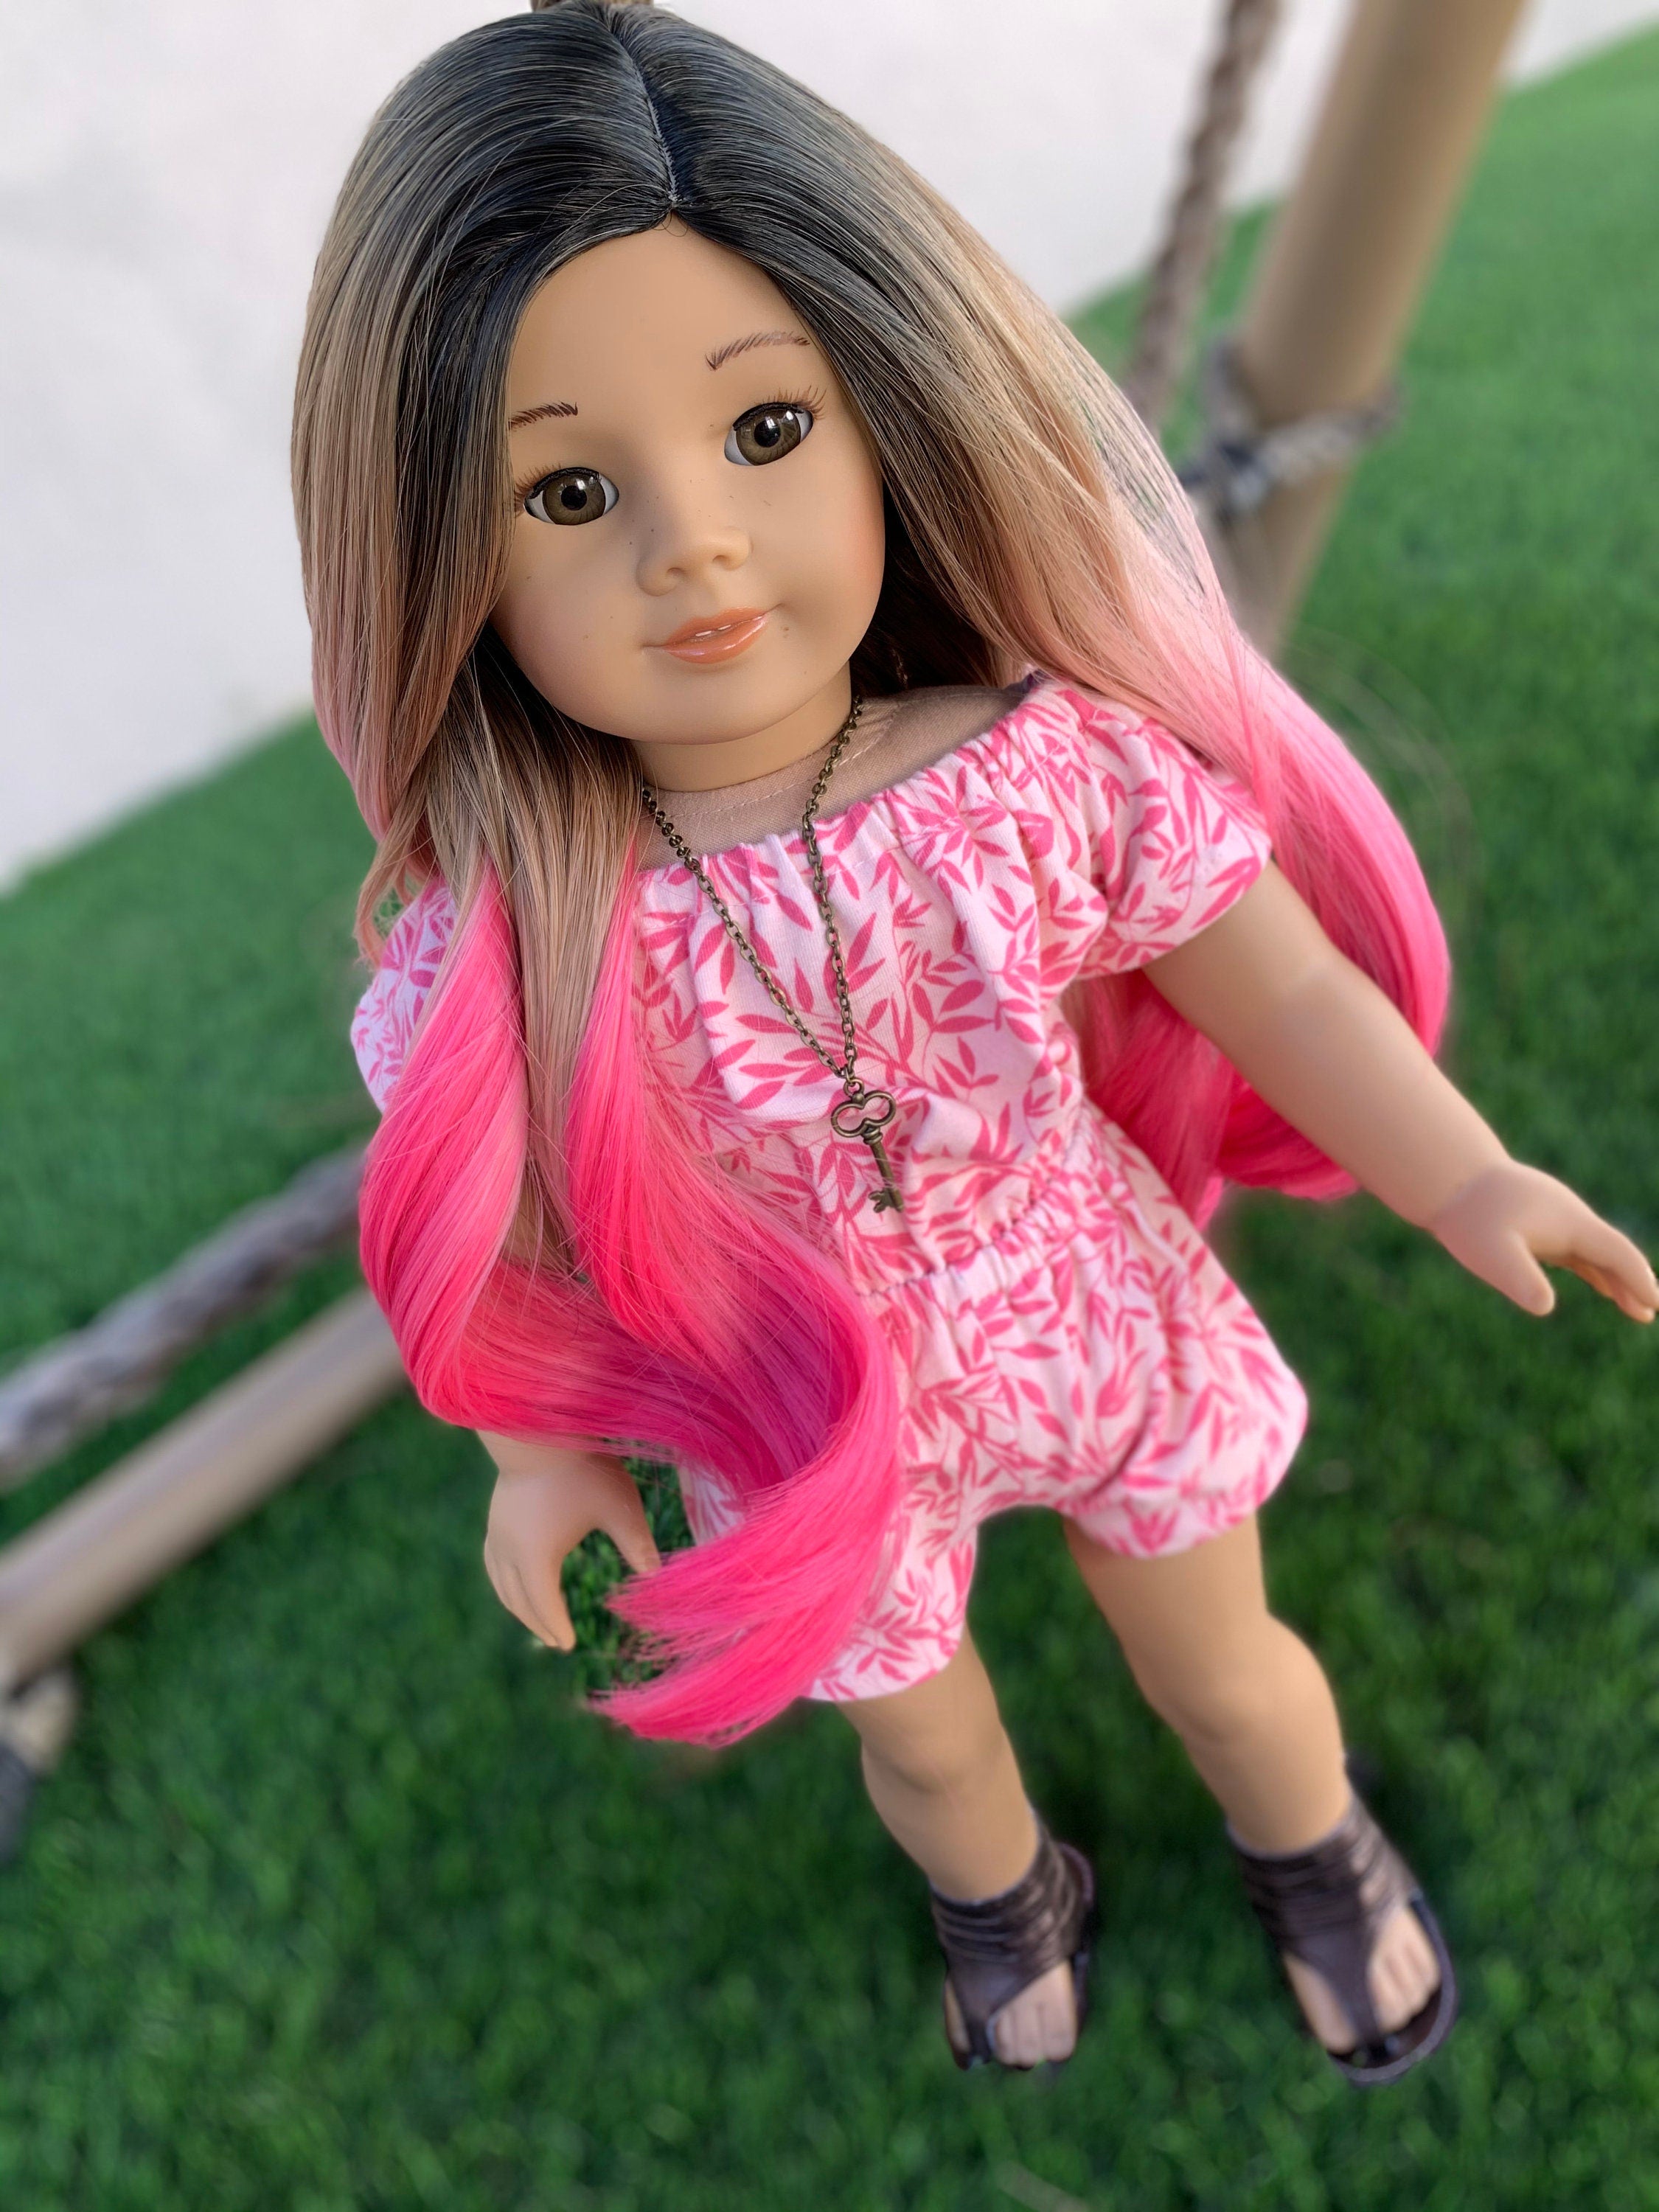 Custom DYED OMBRE Doll Wig for 18" American Girl Doll Heat Safe Tangle Resistant - fits 10-11" head size of all 18" dolls Unicorn Ombre